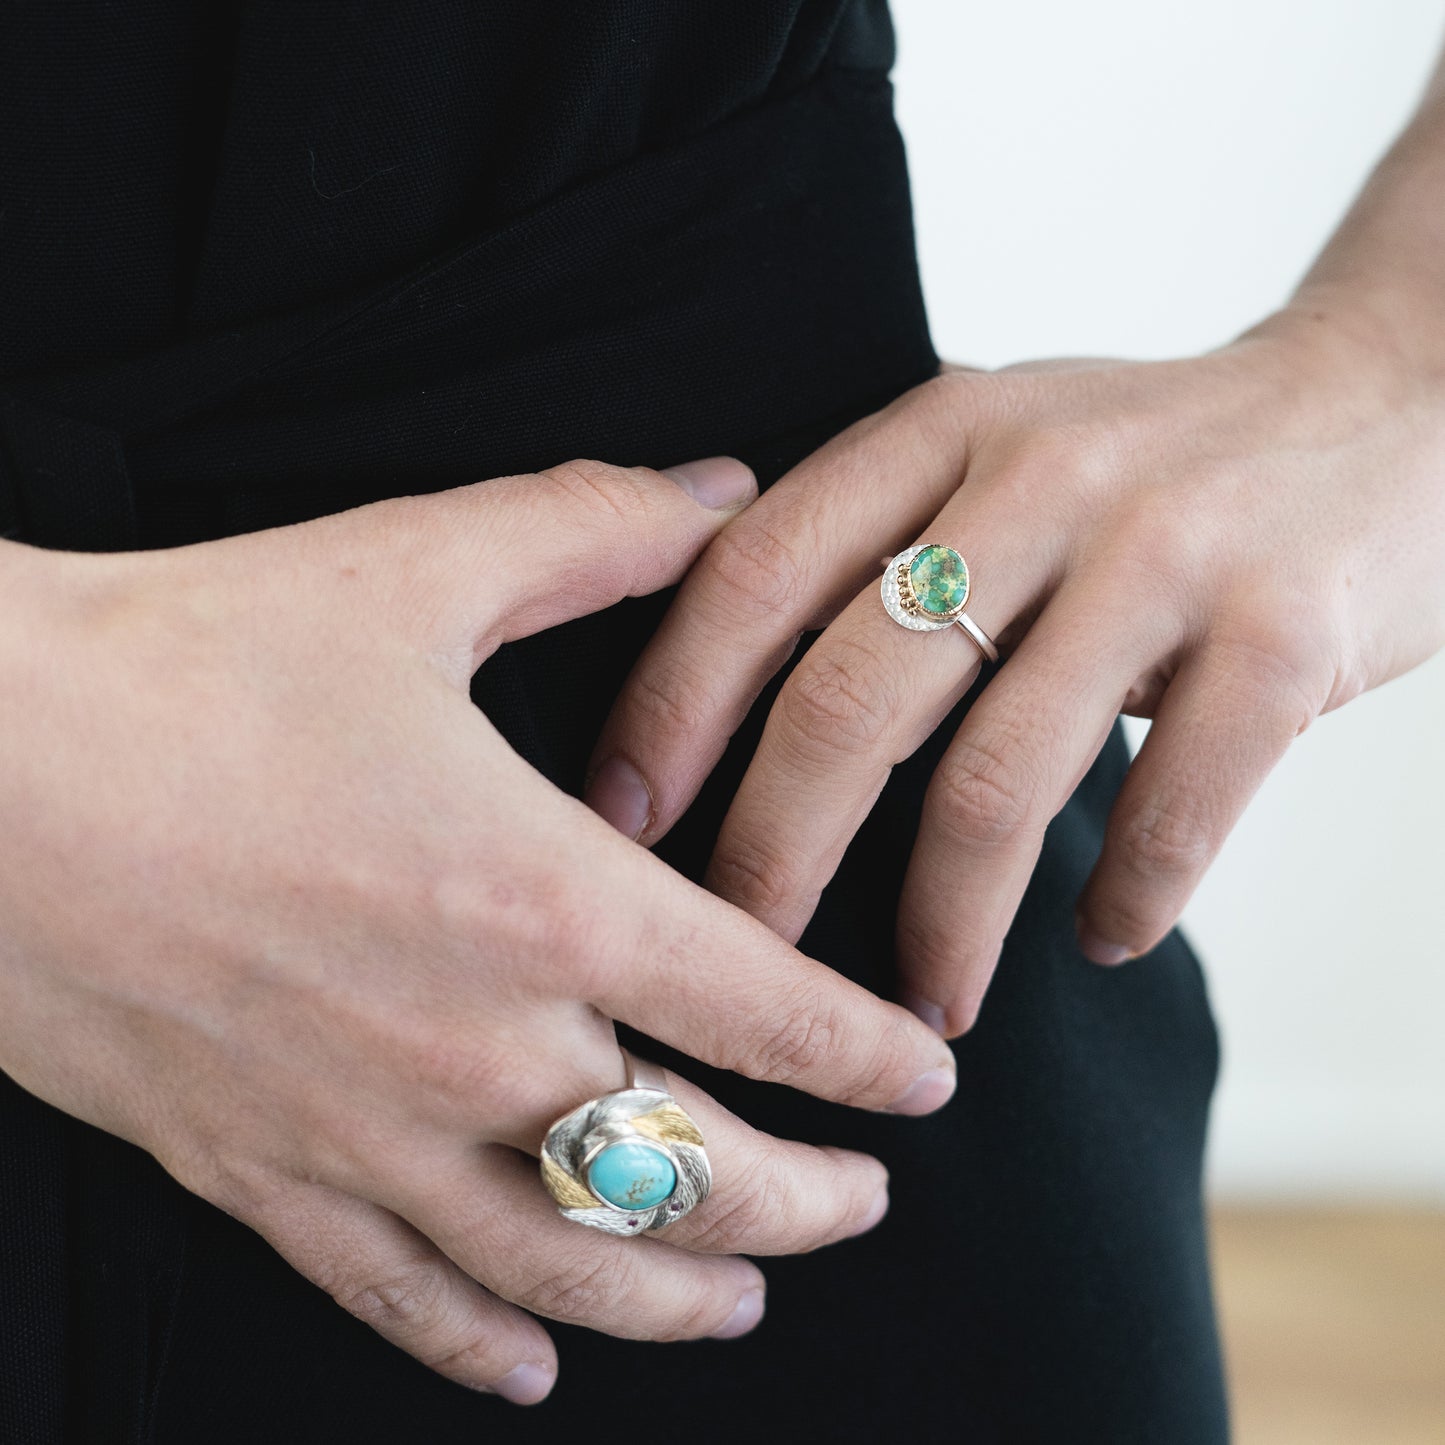 woman wearing blue and green gemstone rings